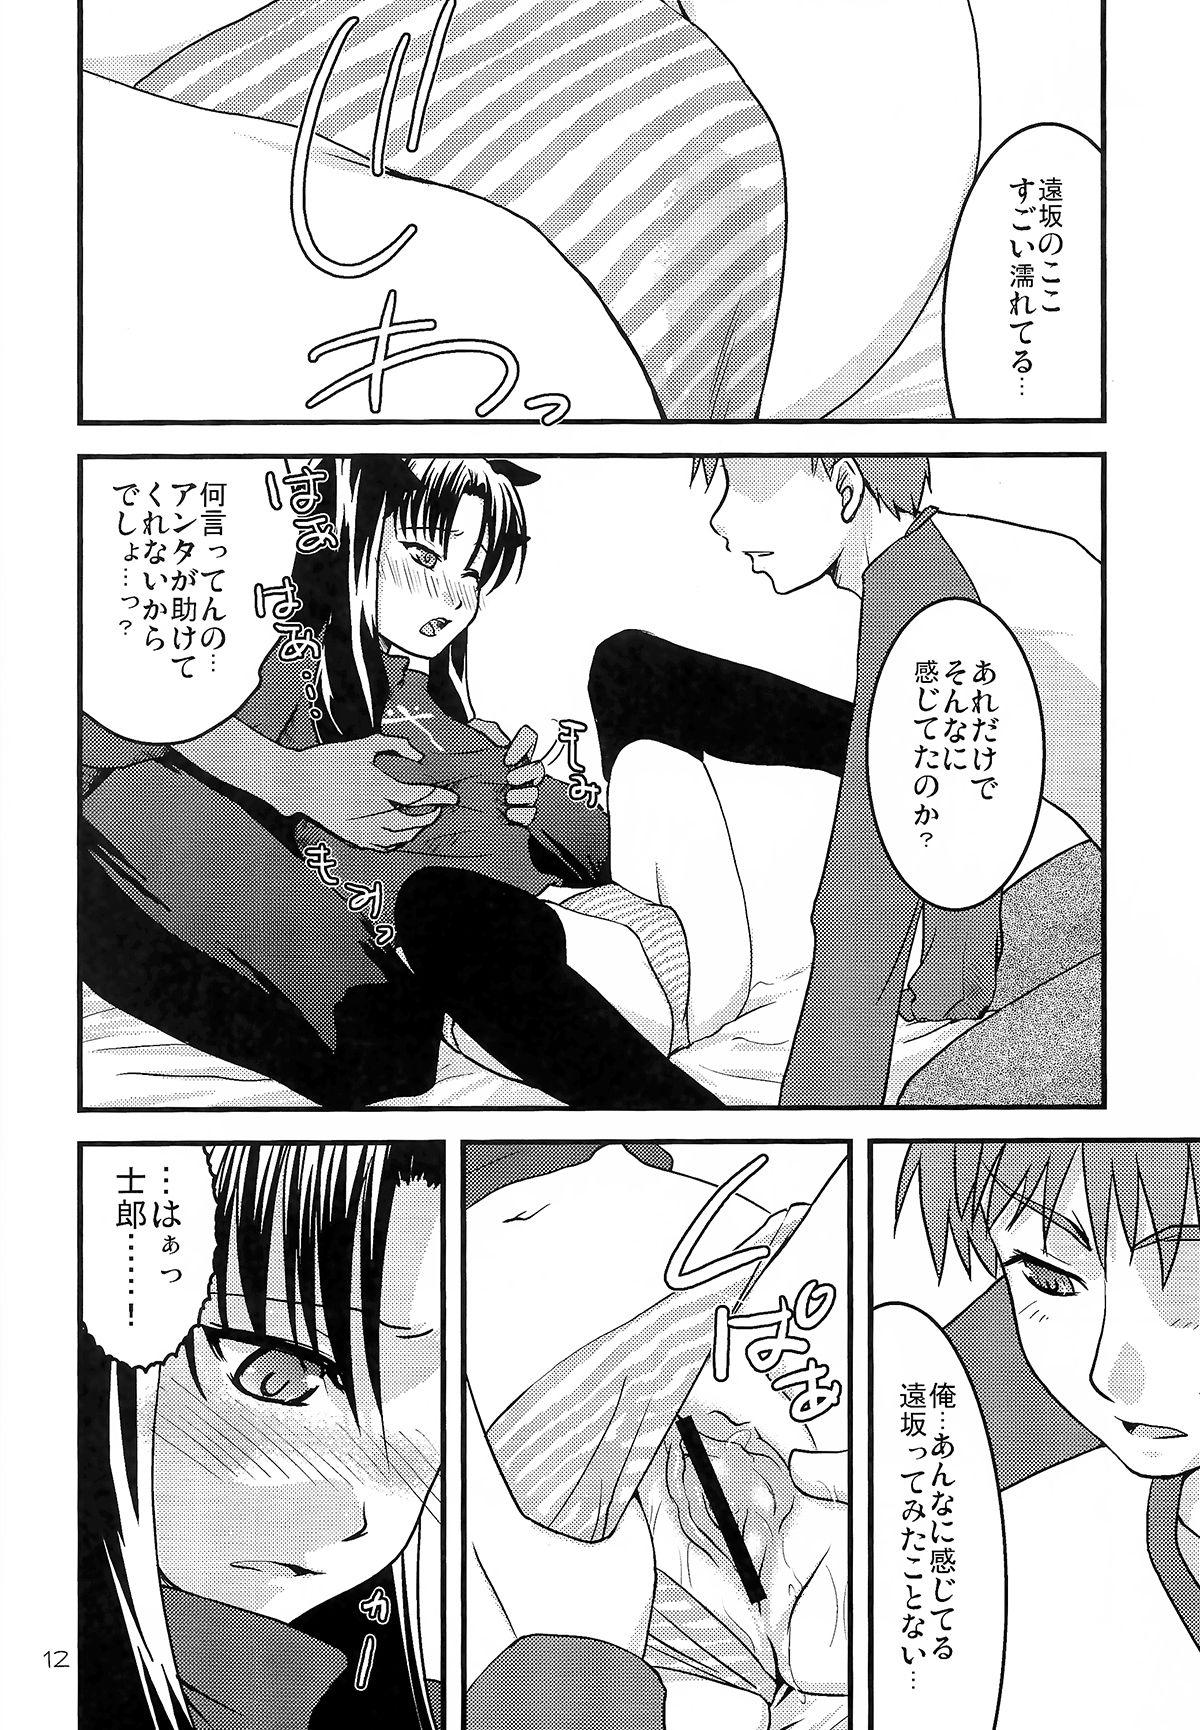 Ffm Fakers - Fate stay night Animated - Page 11